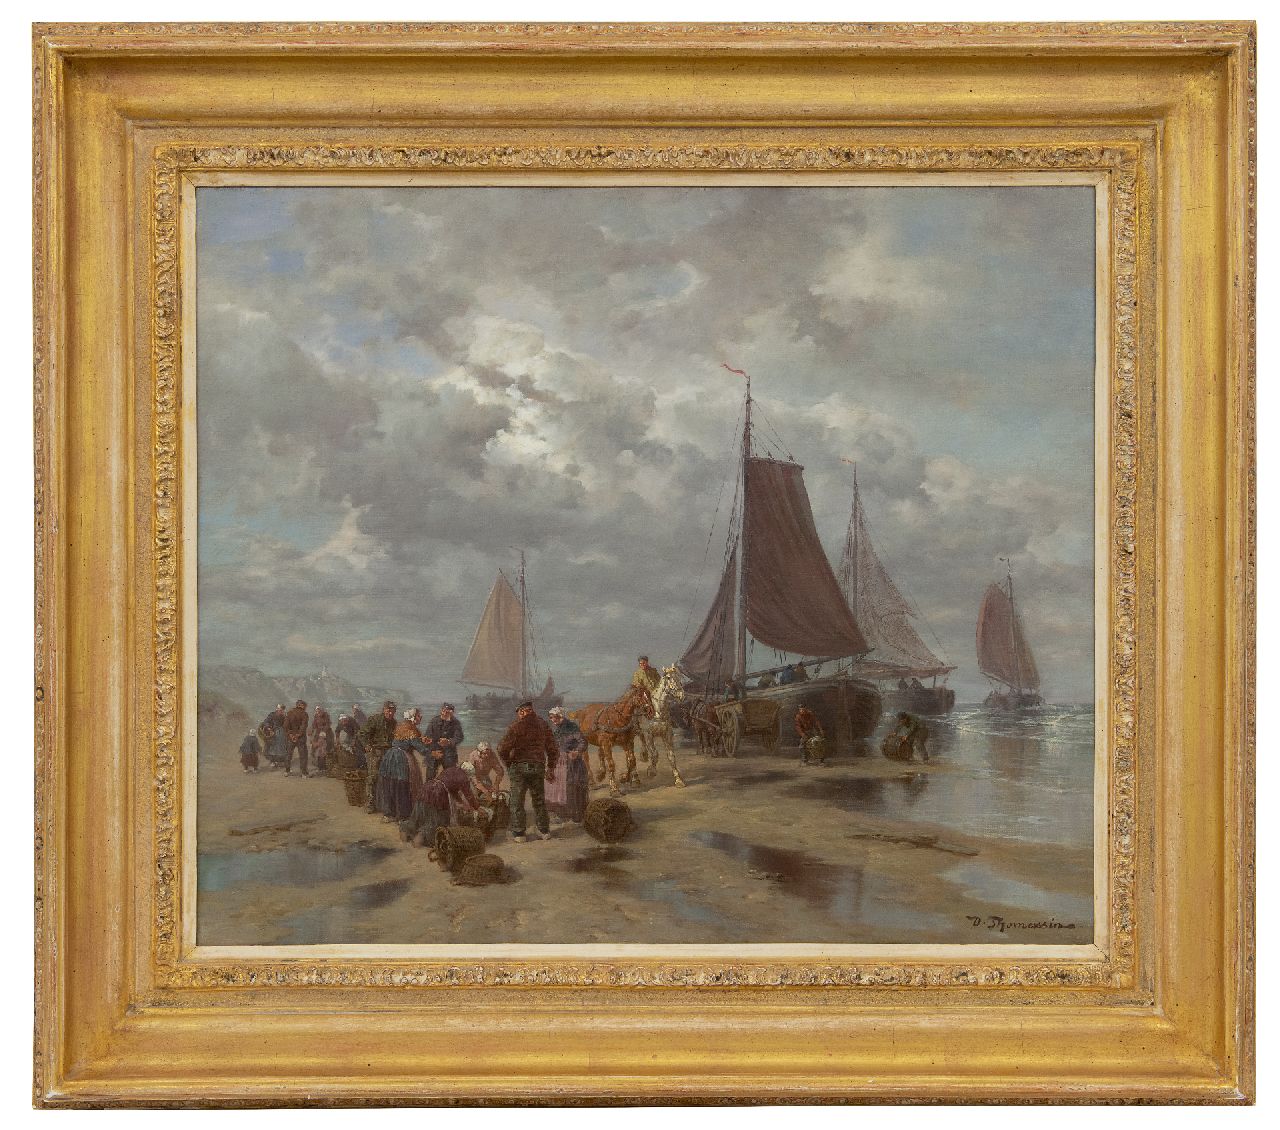 Thomassin D.  | Désiré Thomassin | Paintings offered for sale | Selling fish on the beach, oil on canvas 50.5 x 60.5 cm, signed l.r.